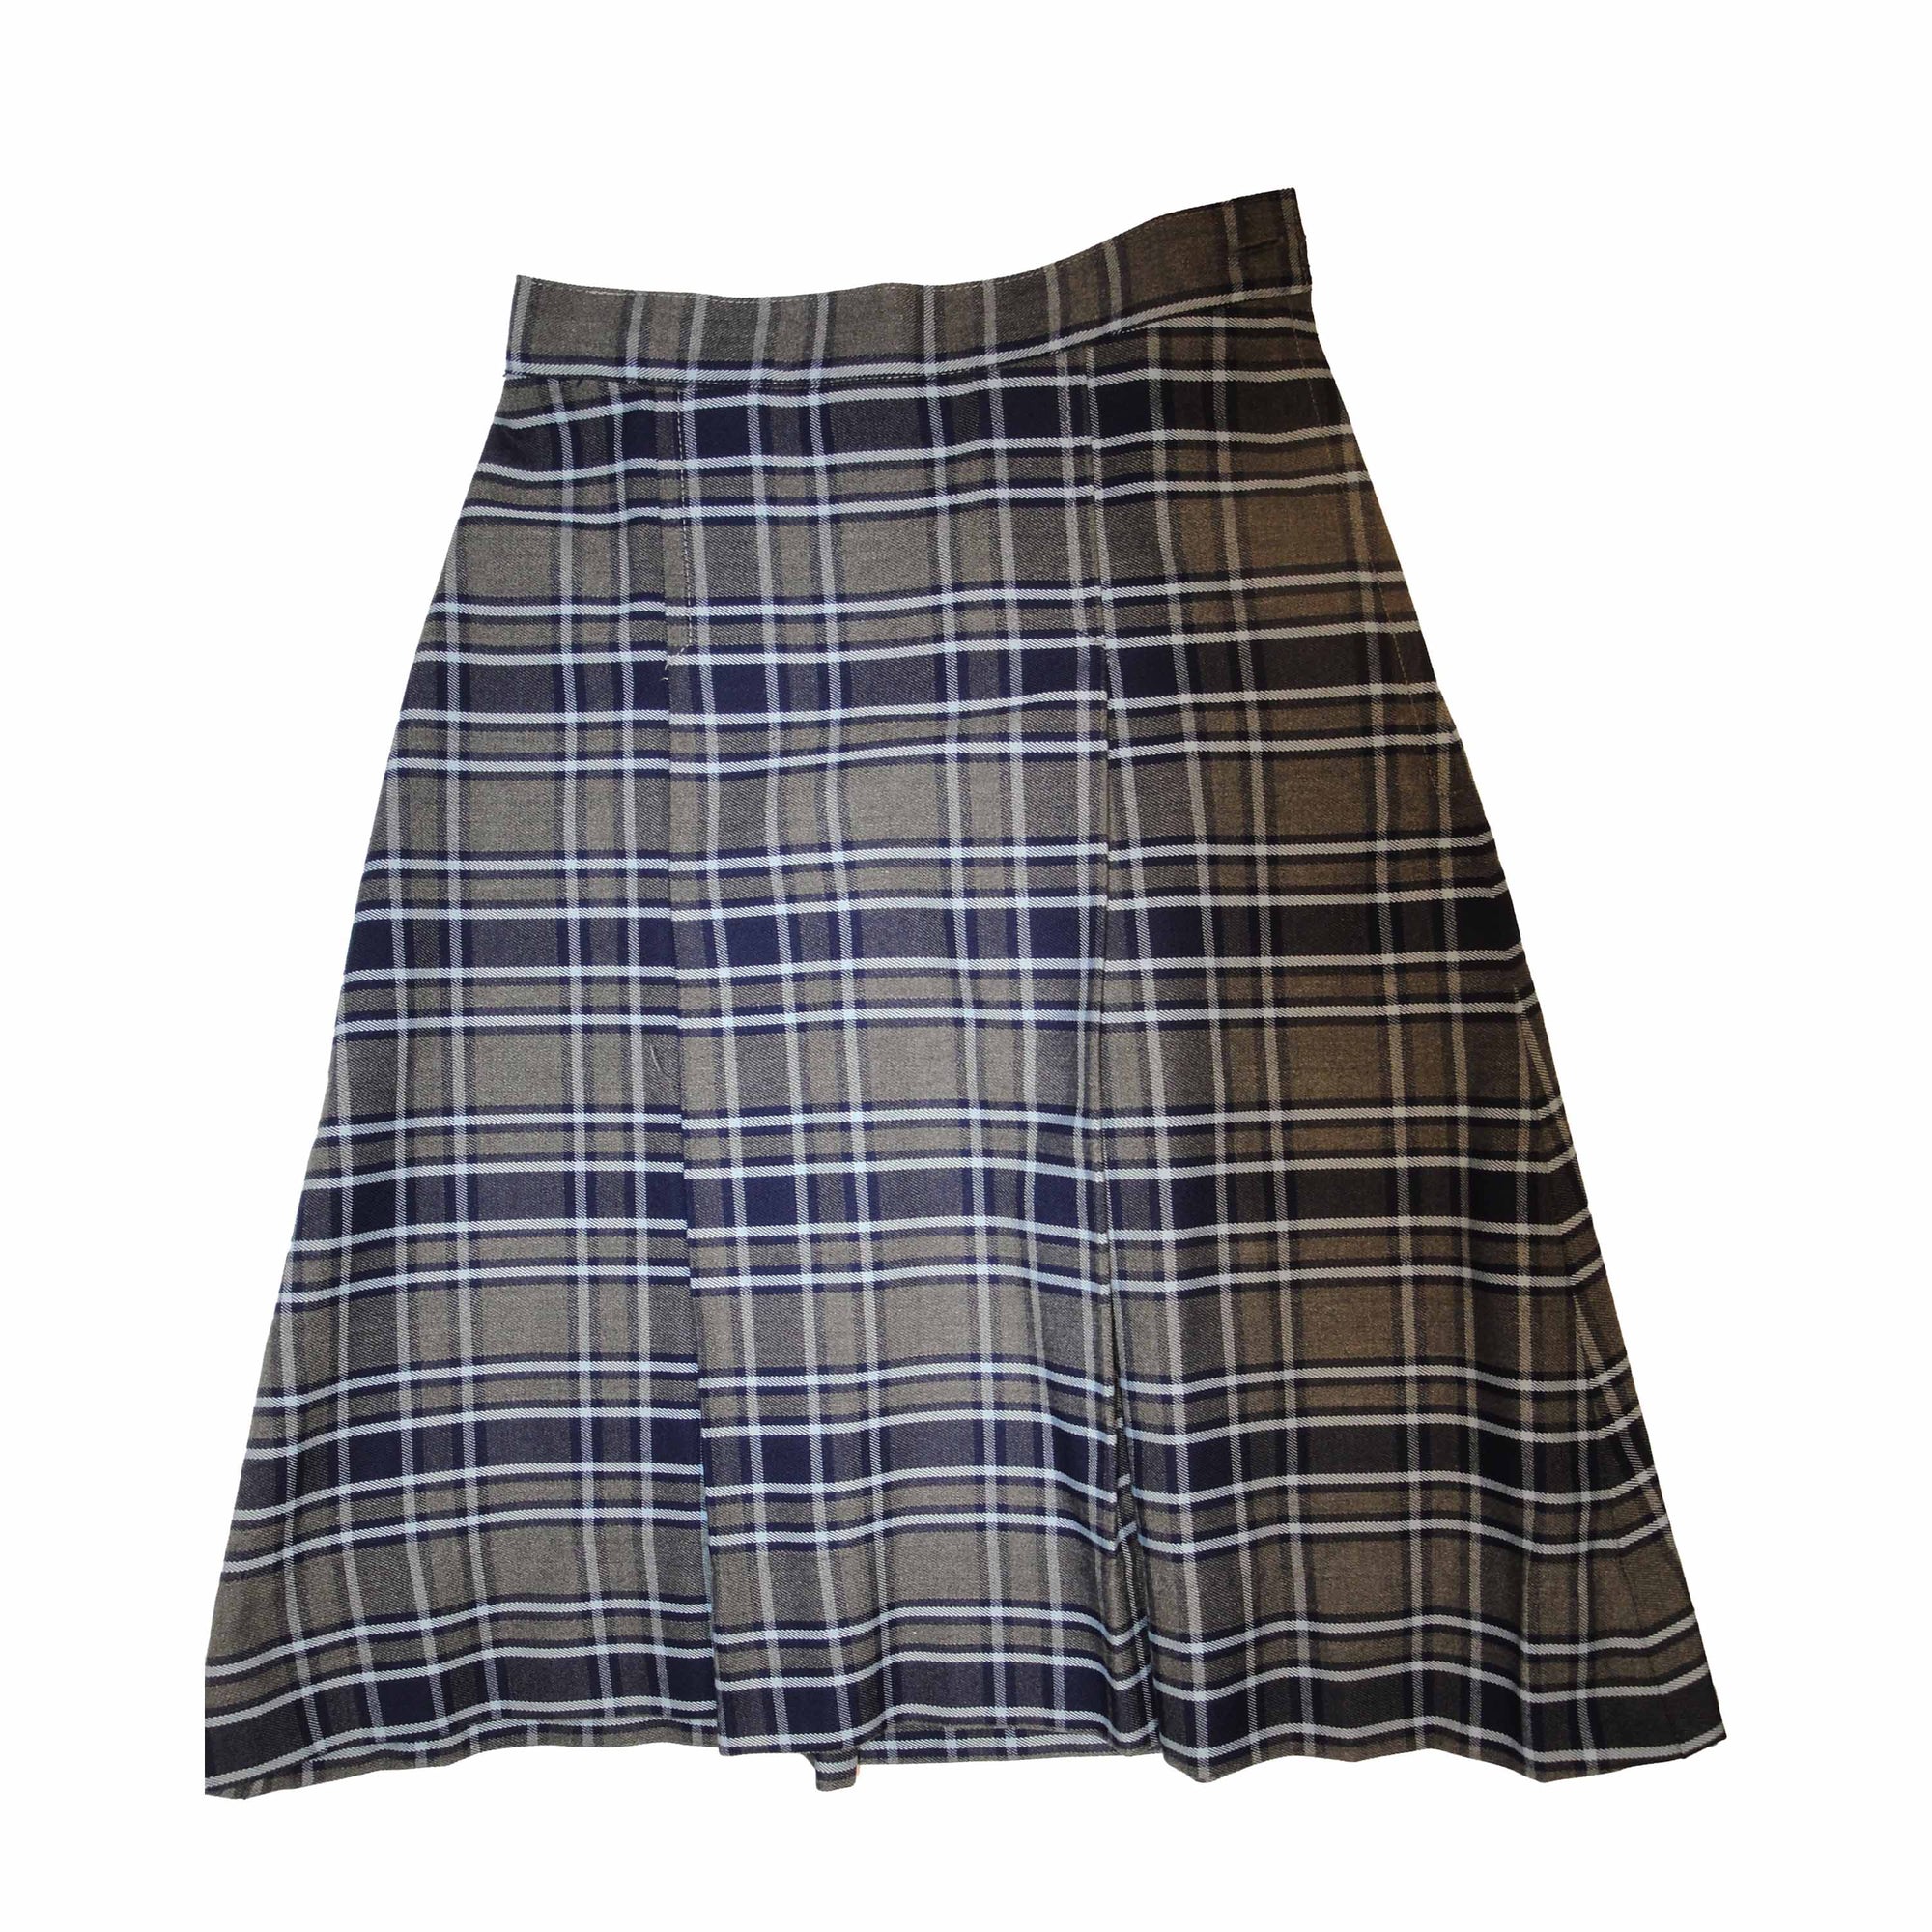 Our Lady of Lourdes Winter Skirt